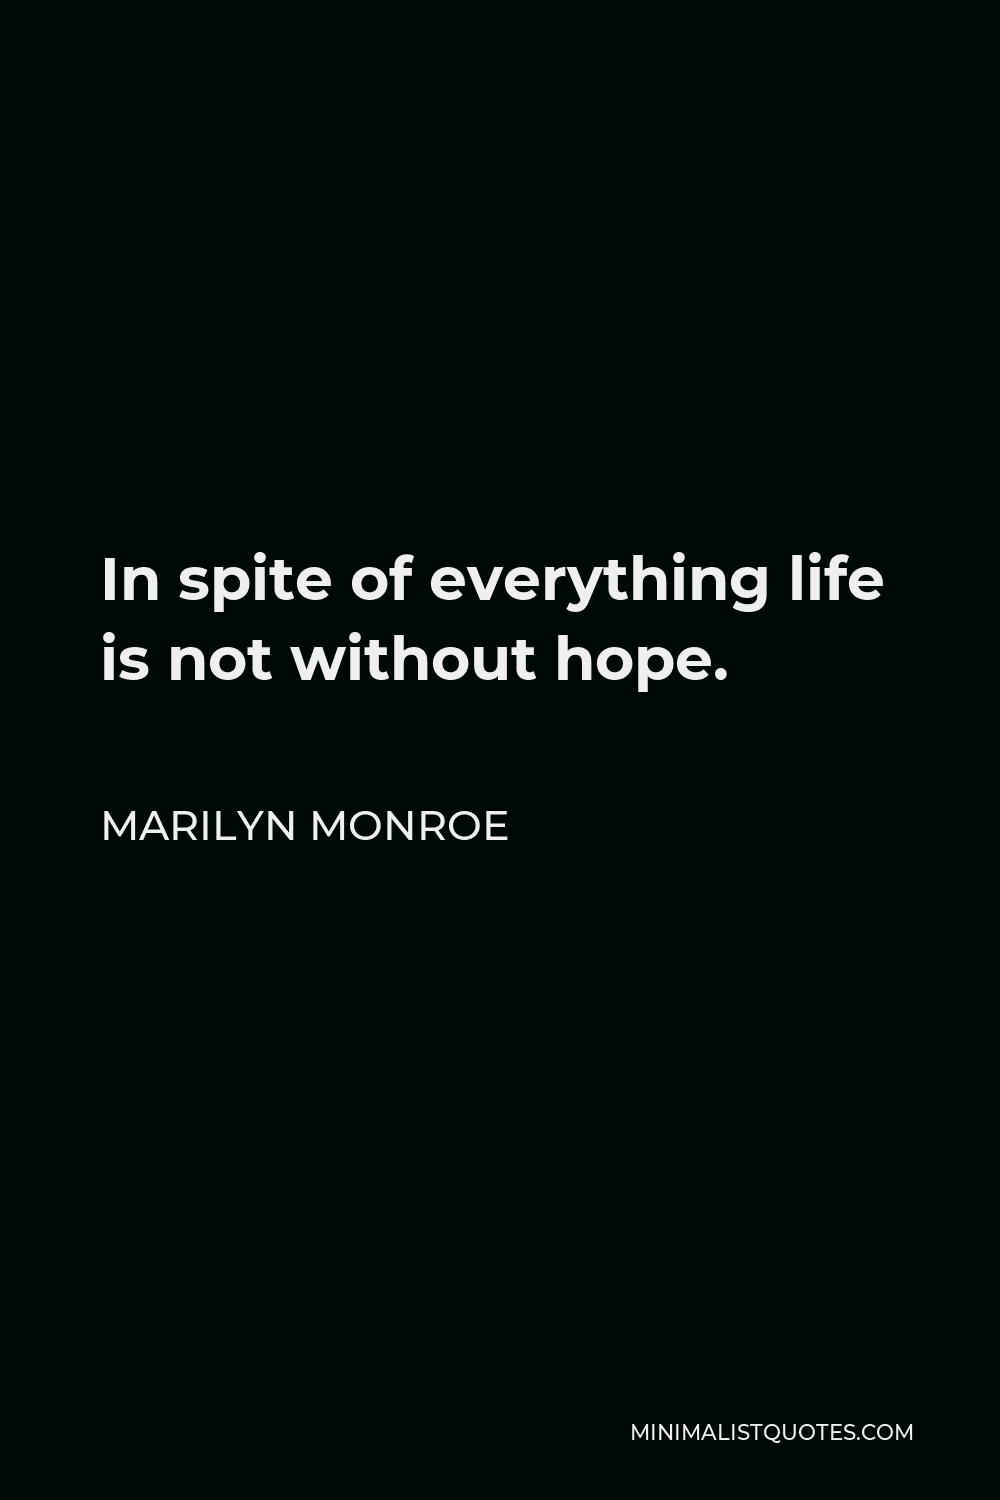 Marilyn Monroe Quote - In spite of everything life is not without hope.